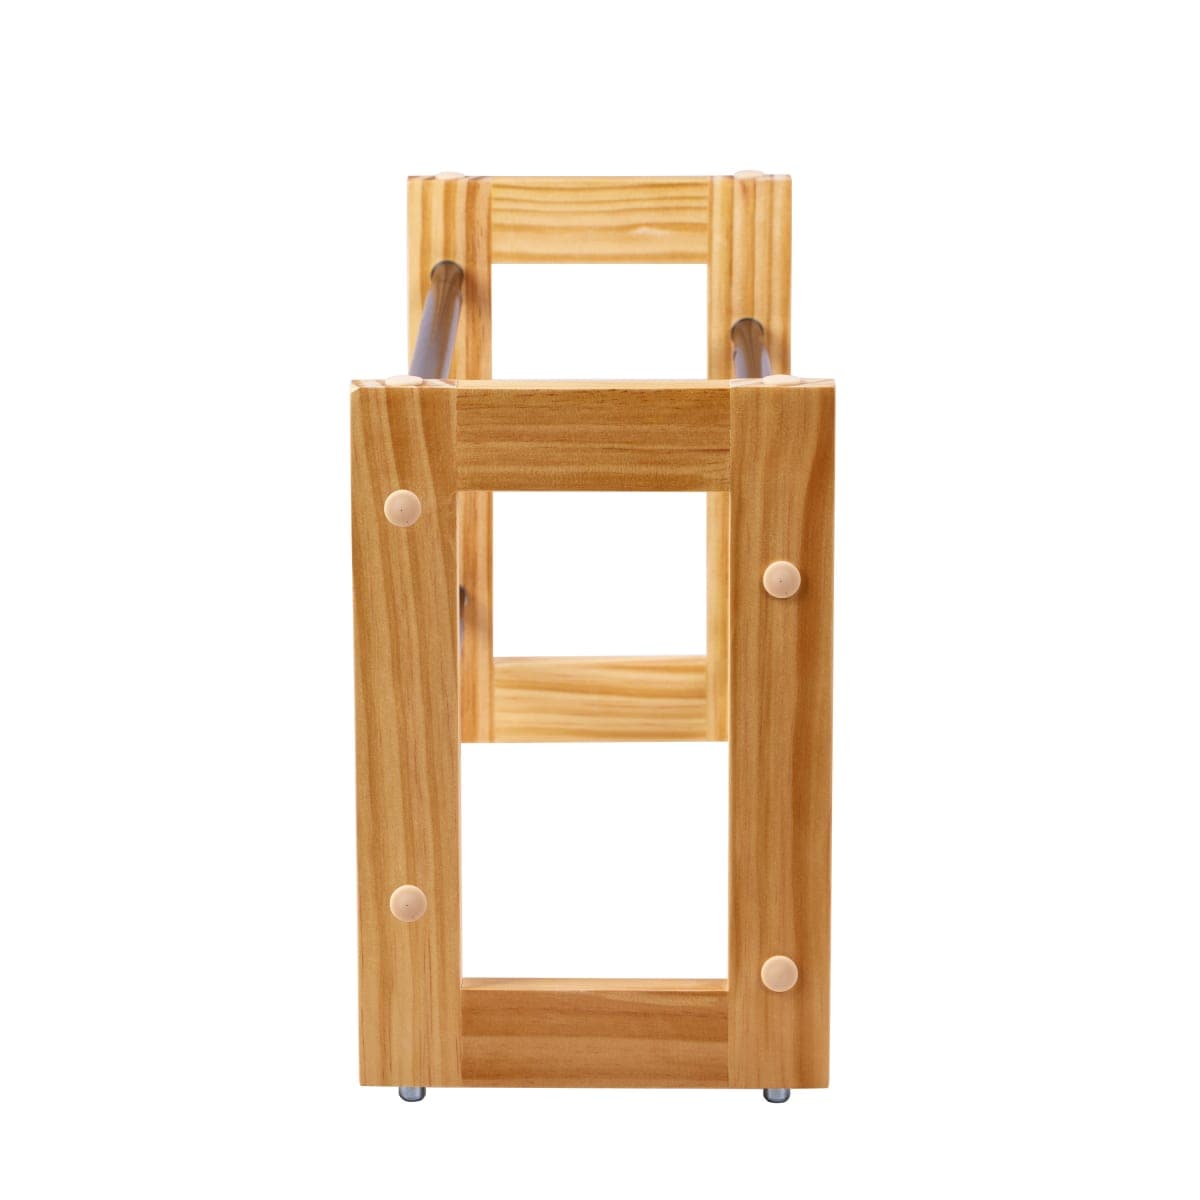 FLACKY EXTENDABLE AND STACKABLE WOODEN METAL SHOE SHELF SPACEO - best price from Maltashopper.com BR410006321